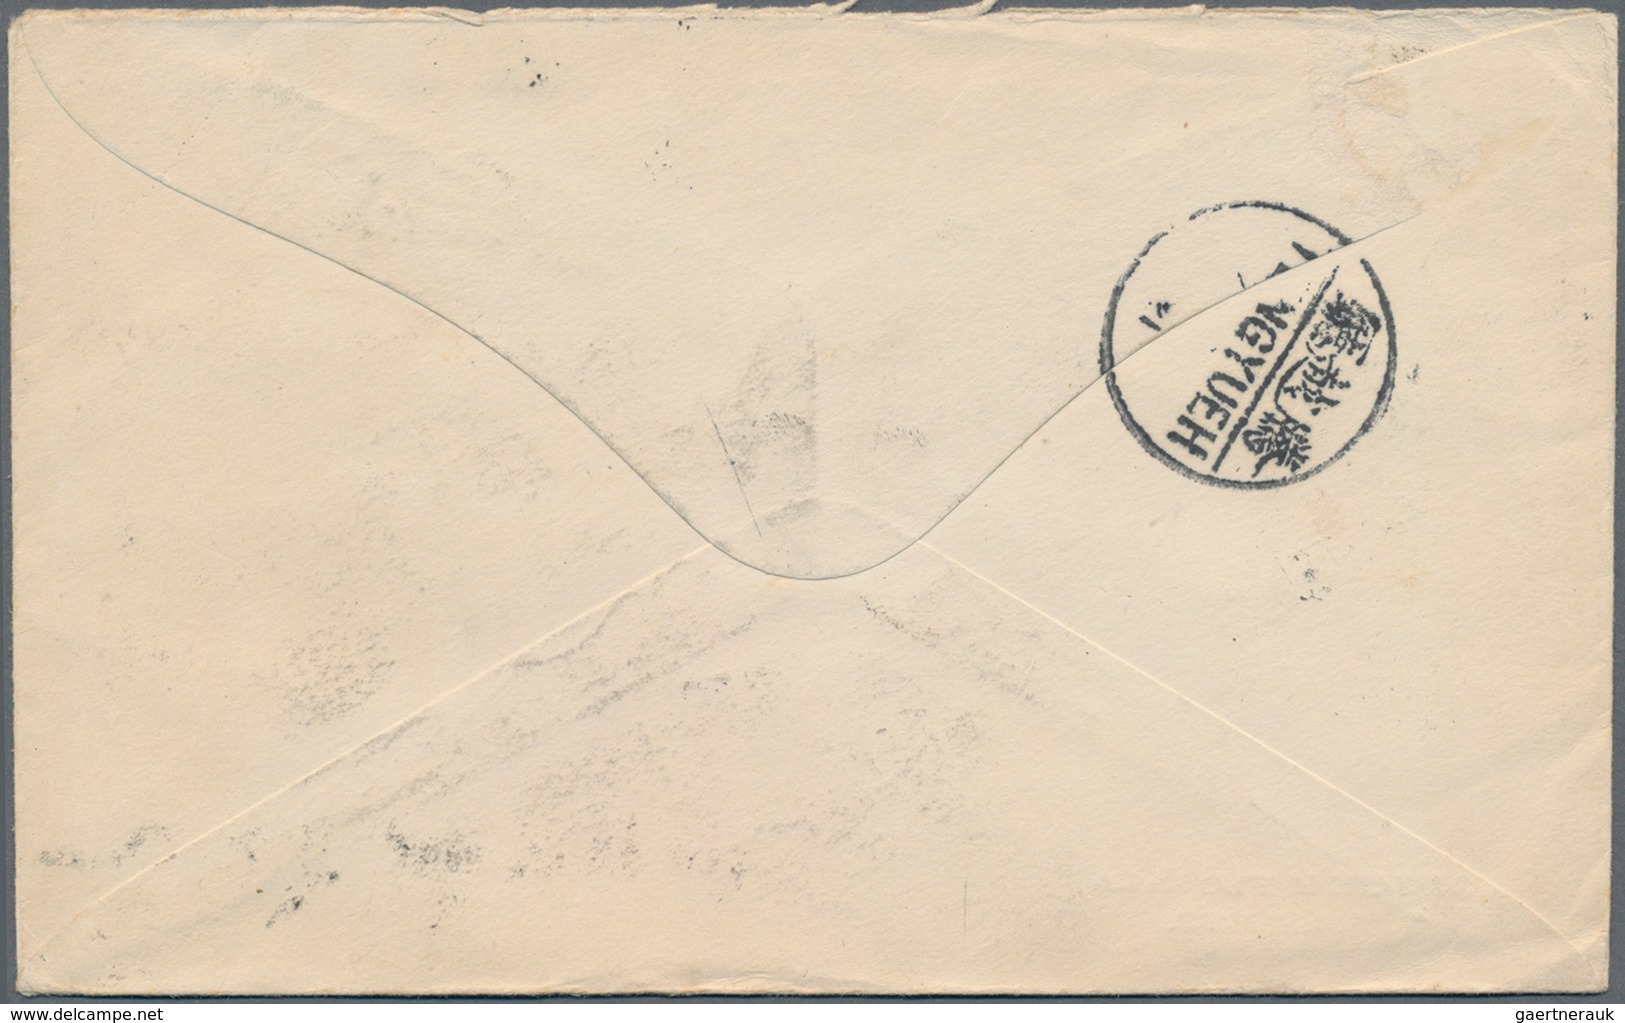 China - Portomarken: 1921. Envelope From The 'lrrawaddy Flotilla Co' Addressed To 'H.G. Fletcher, Ac - Postage Due